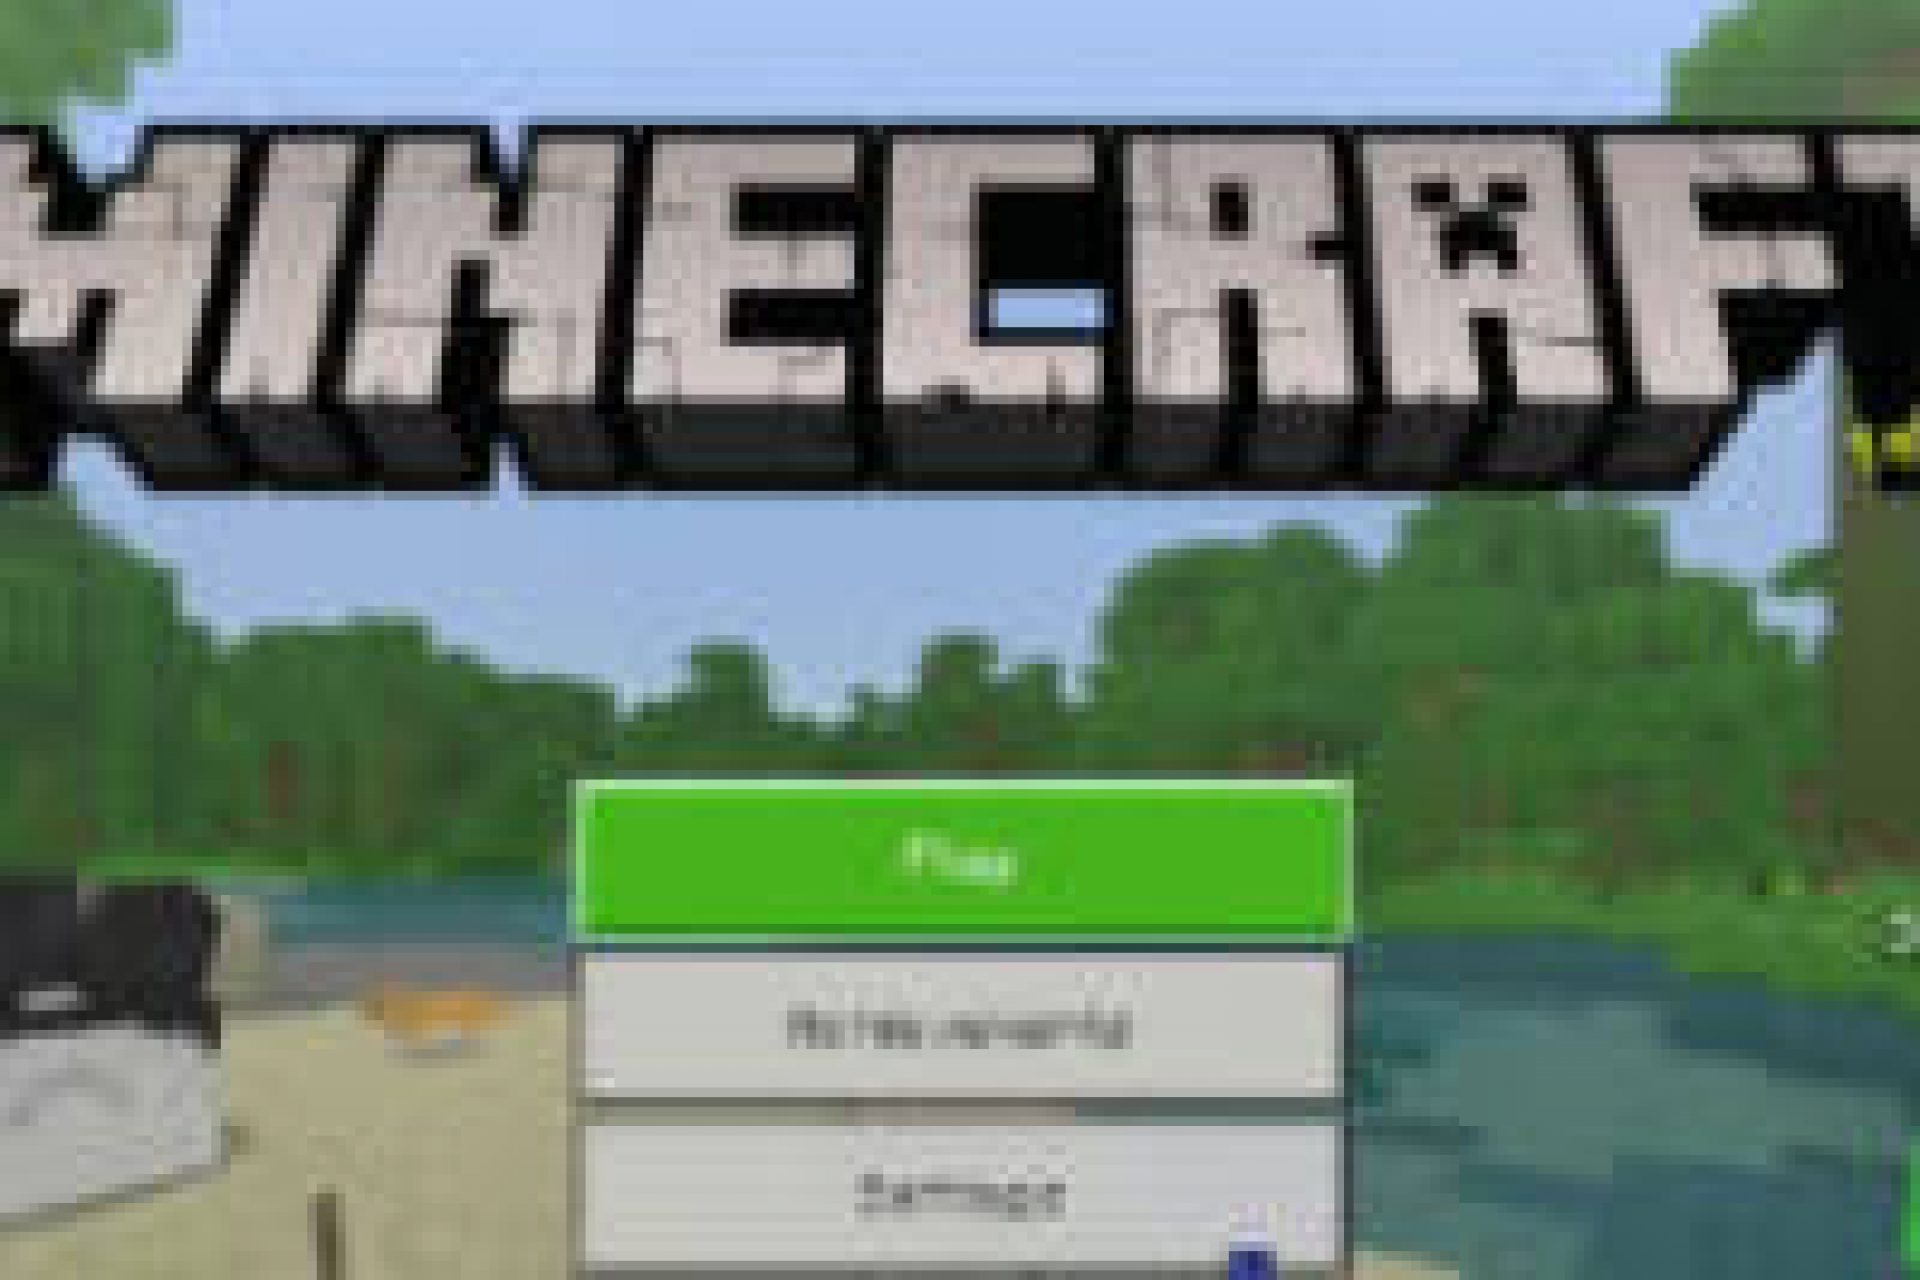 Download Minecraft Apk Free For Android With Xbox Live